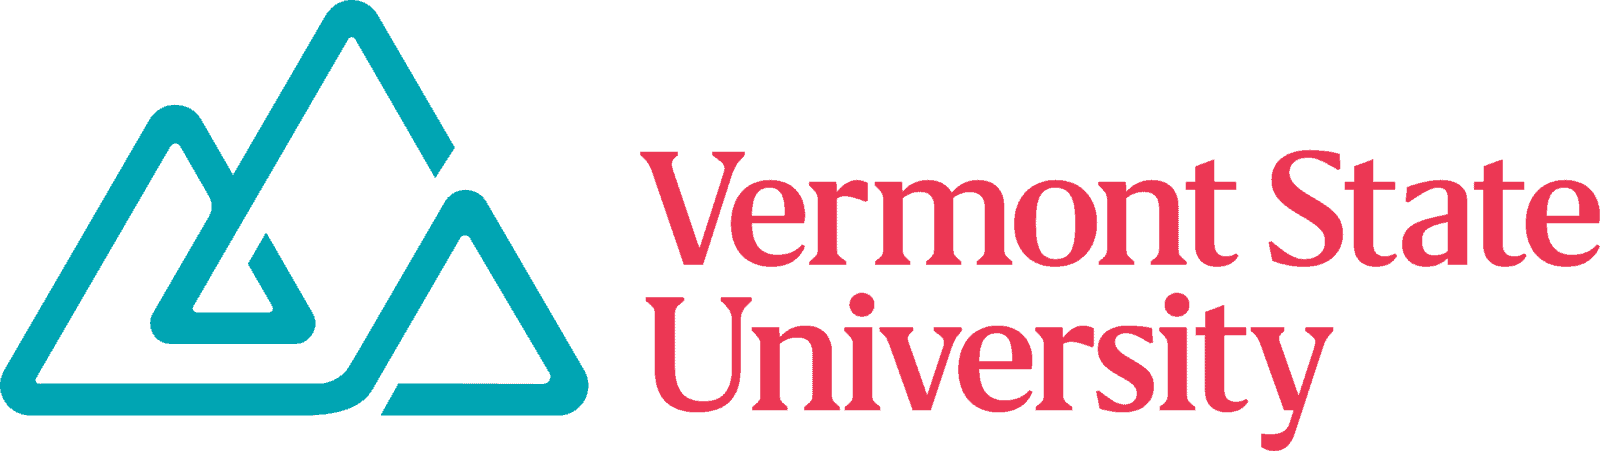 Vermont State University logo in blue and red with mountains outline.